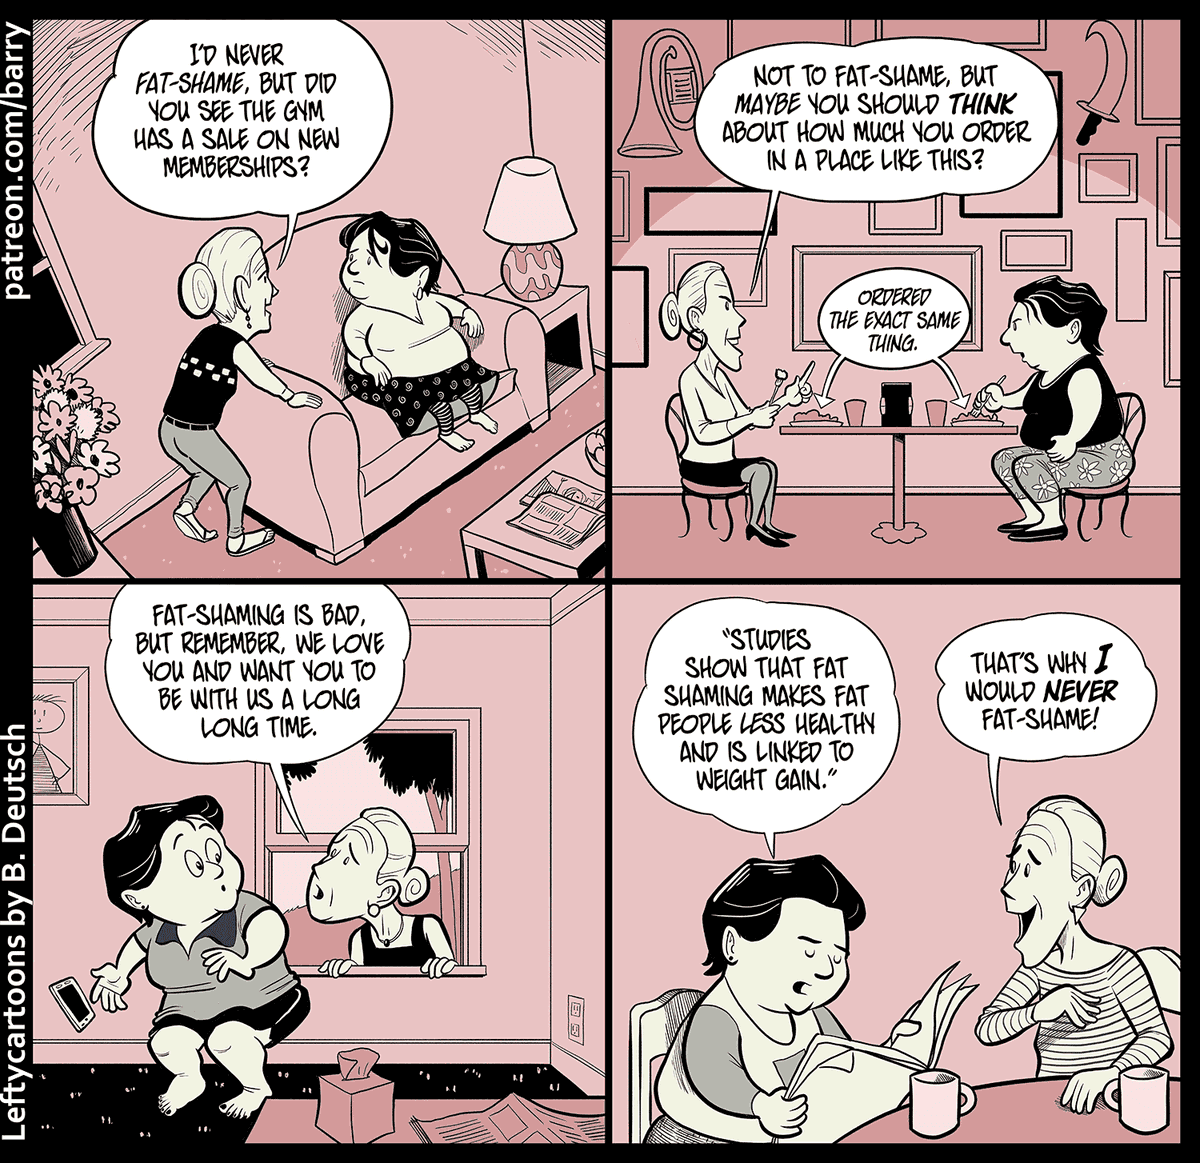 A thread of Fat Acceptance cartoons! Fat Shaming Is Bad, But...Transcript:  https://www.patreon.com/posts/fat-shaming-is-31432291Like the cartoons? Support them by retweeting, or by pledging a buck or two at  http://patreon.com/barry .  #FatAcceptance  #PoliCartoon